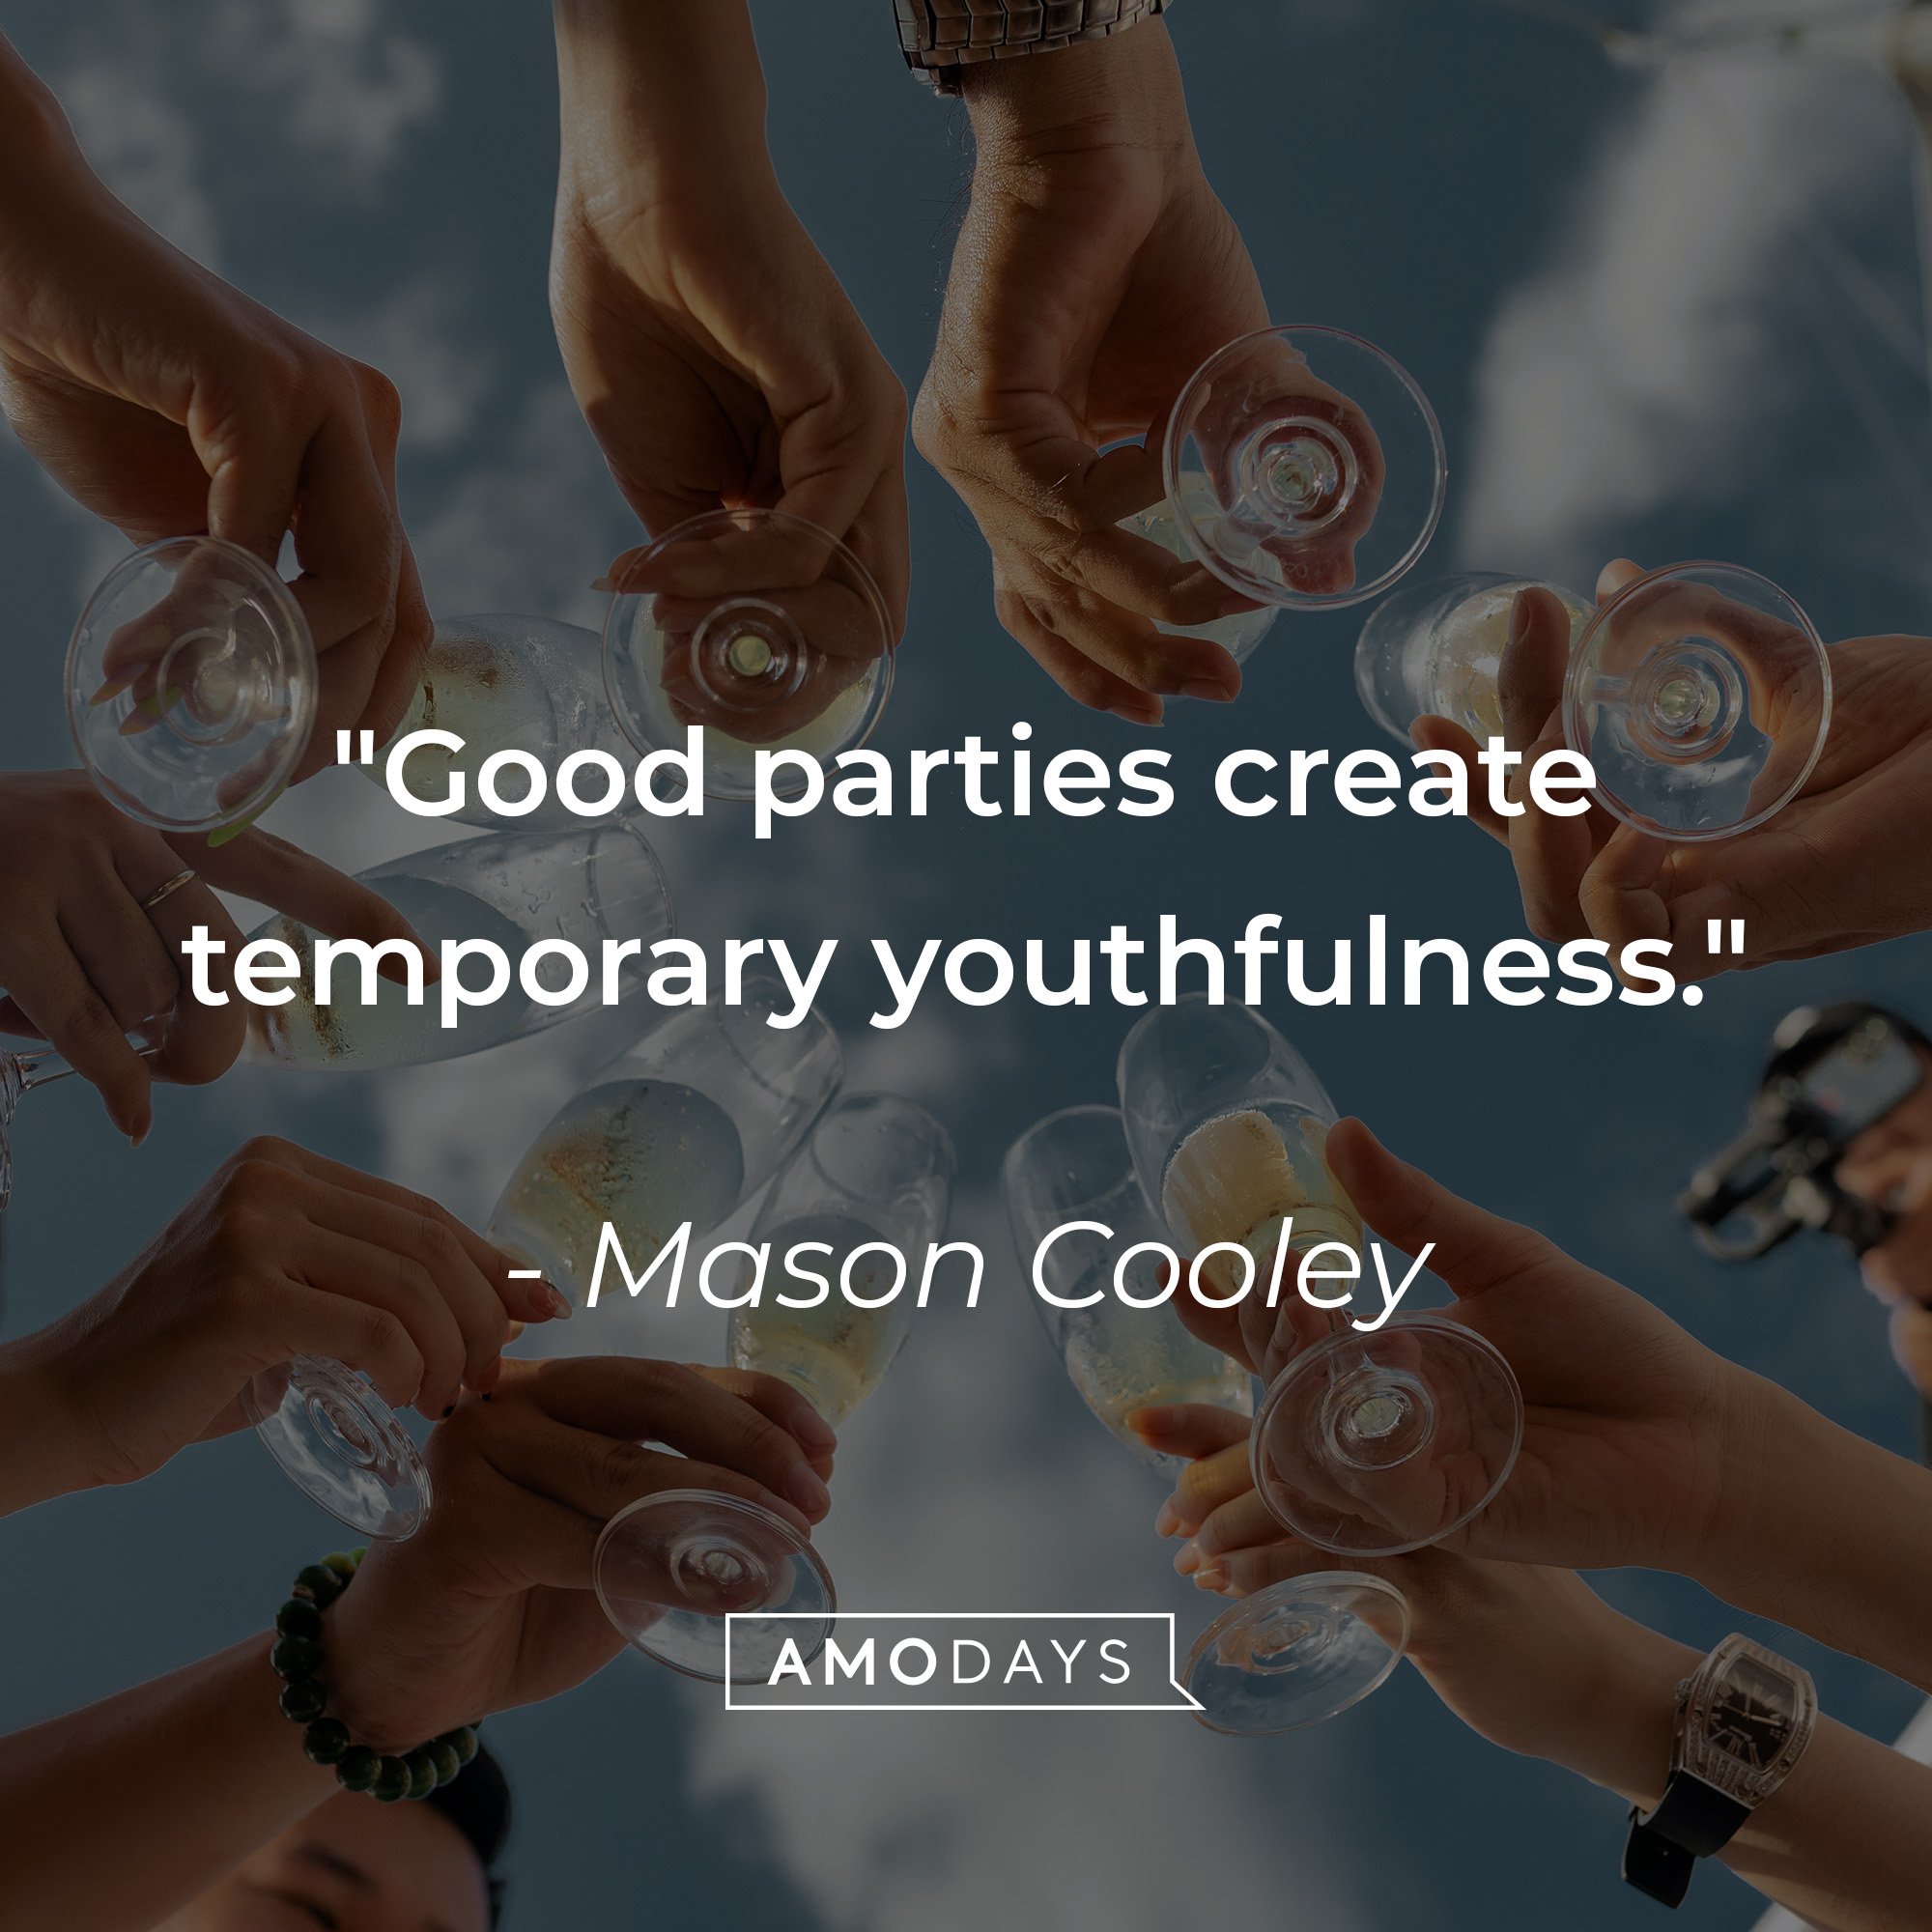 Mason Cooley's quote: "Good parties create temporary youthfulness." | Image: AmoDays 